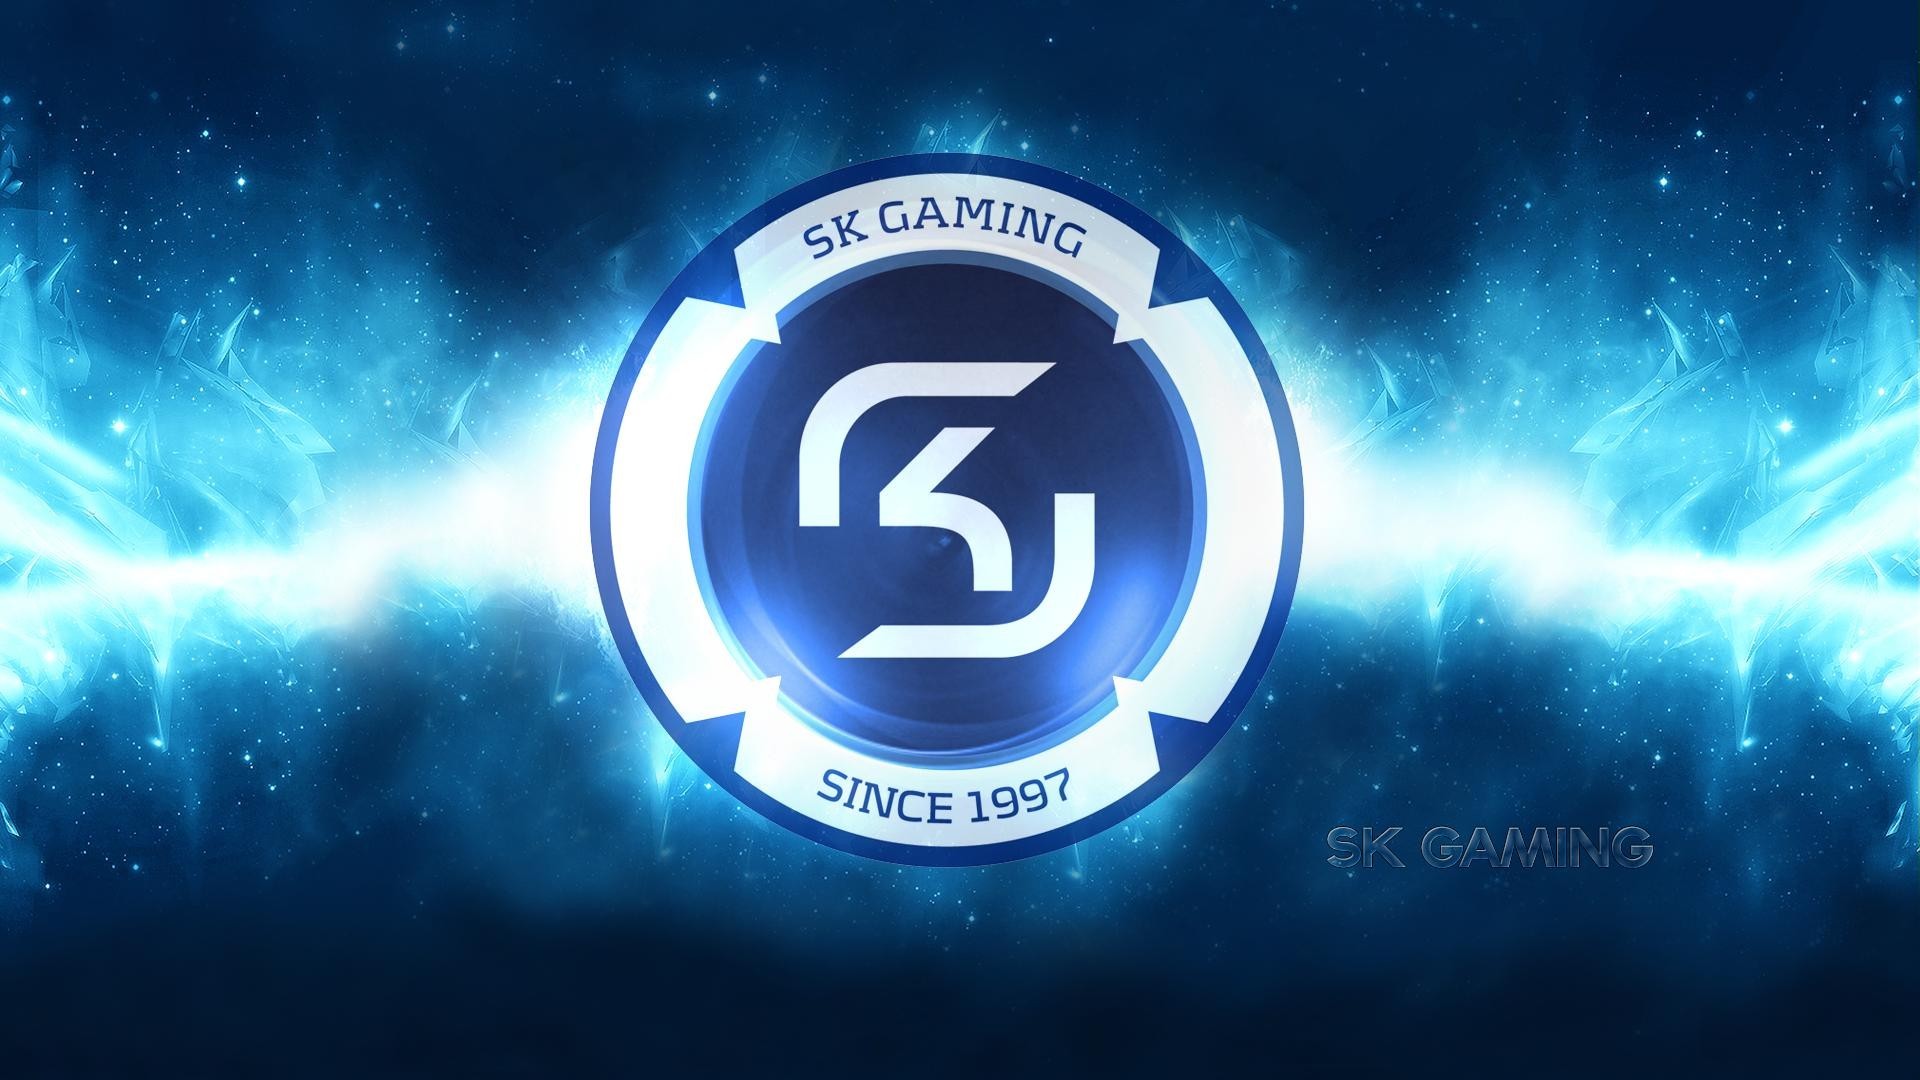 1920x1080 Sk Gaming League Of Legends Team Wallpaper Date Added 07 09 2013 Hits